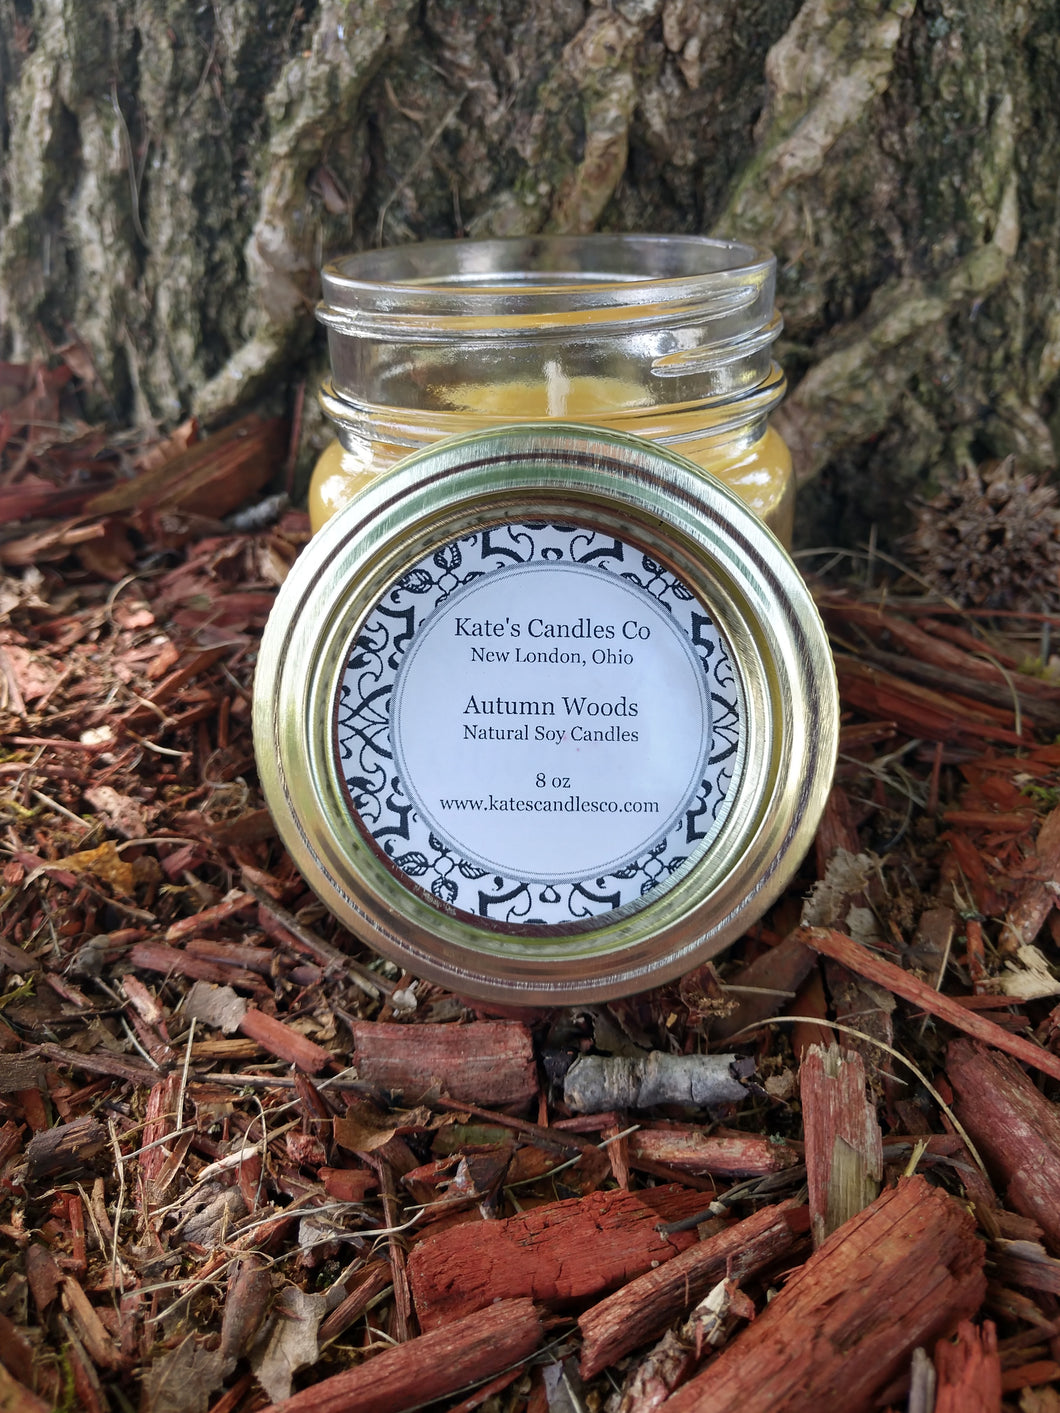 Autumn Woods Candles - Kate's Candles Co. Soy Candles